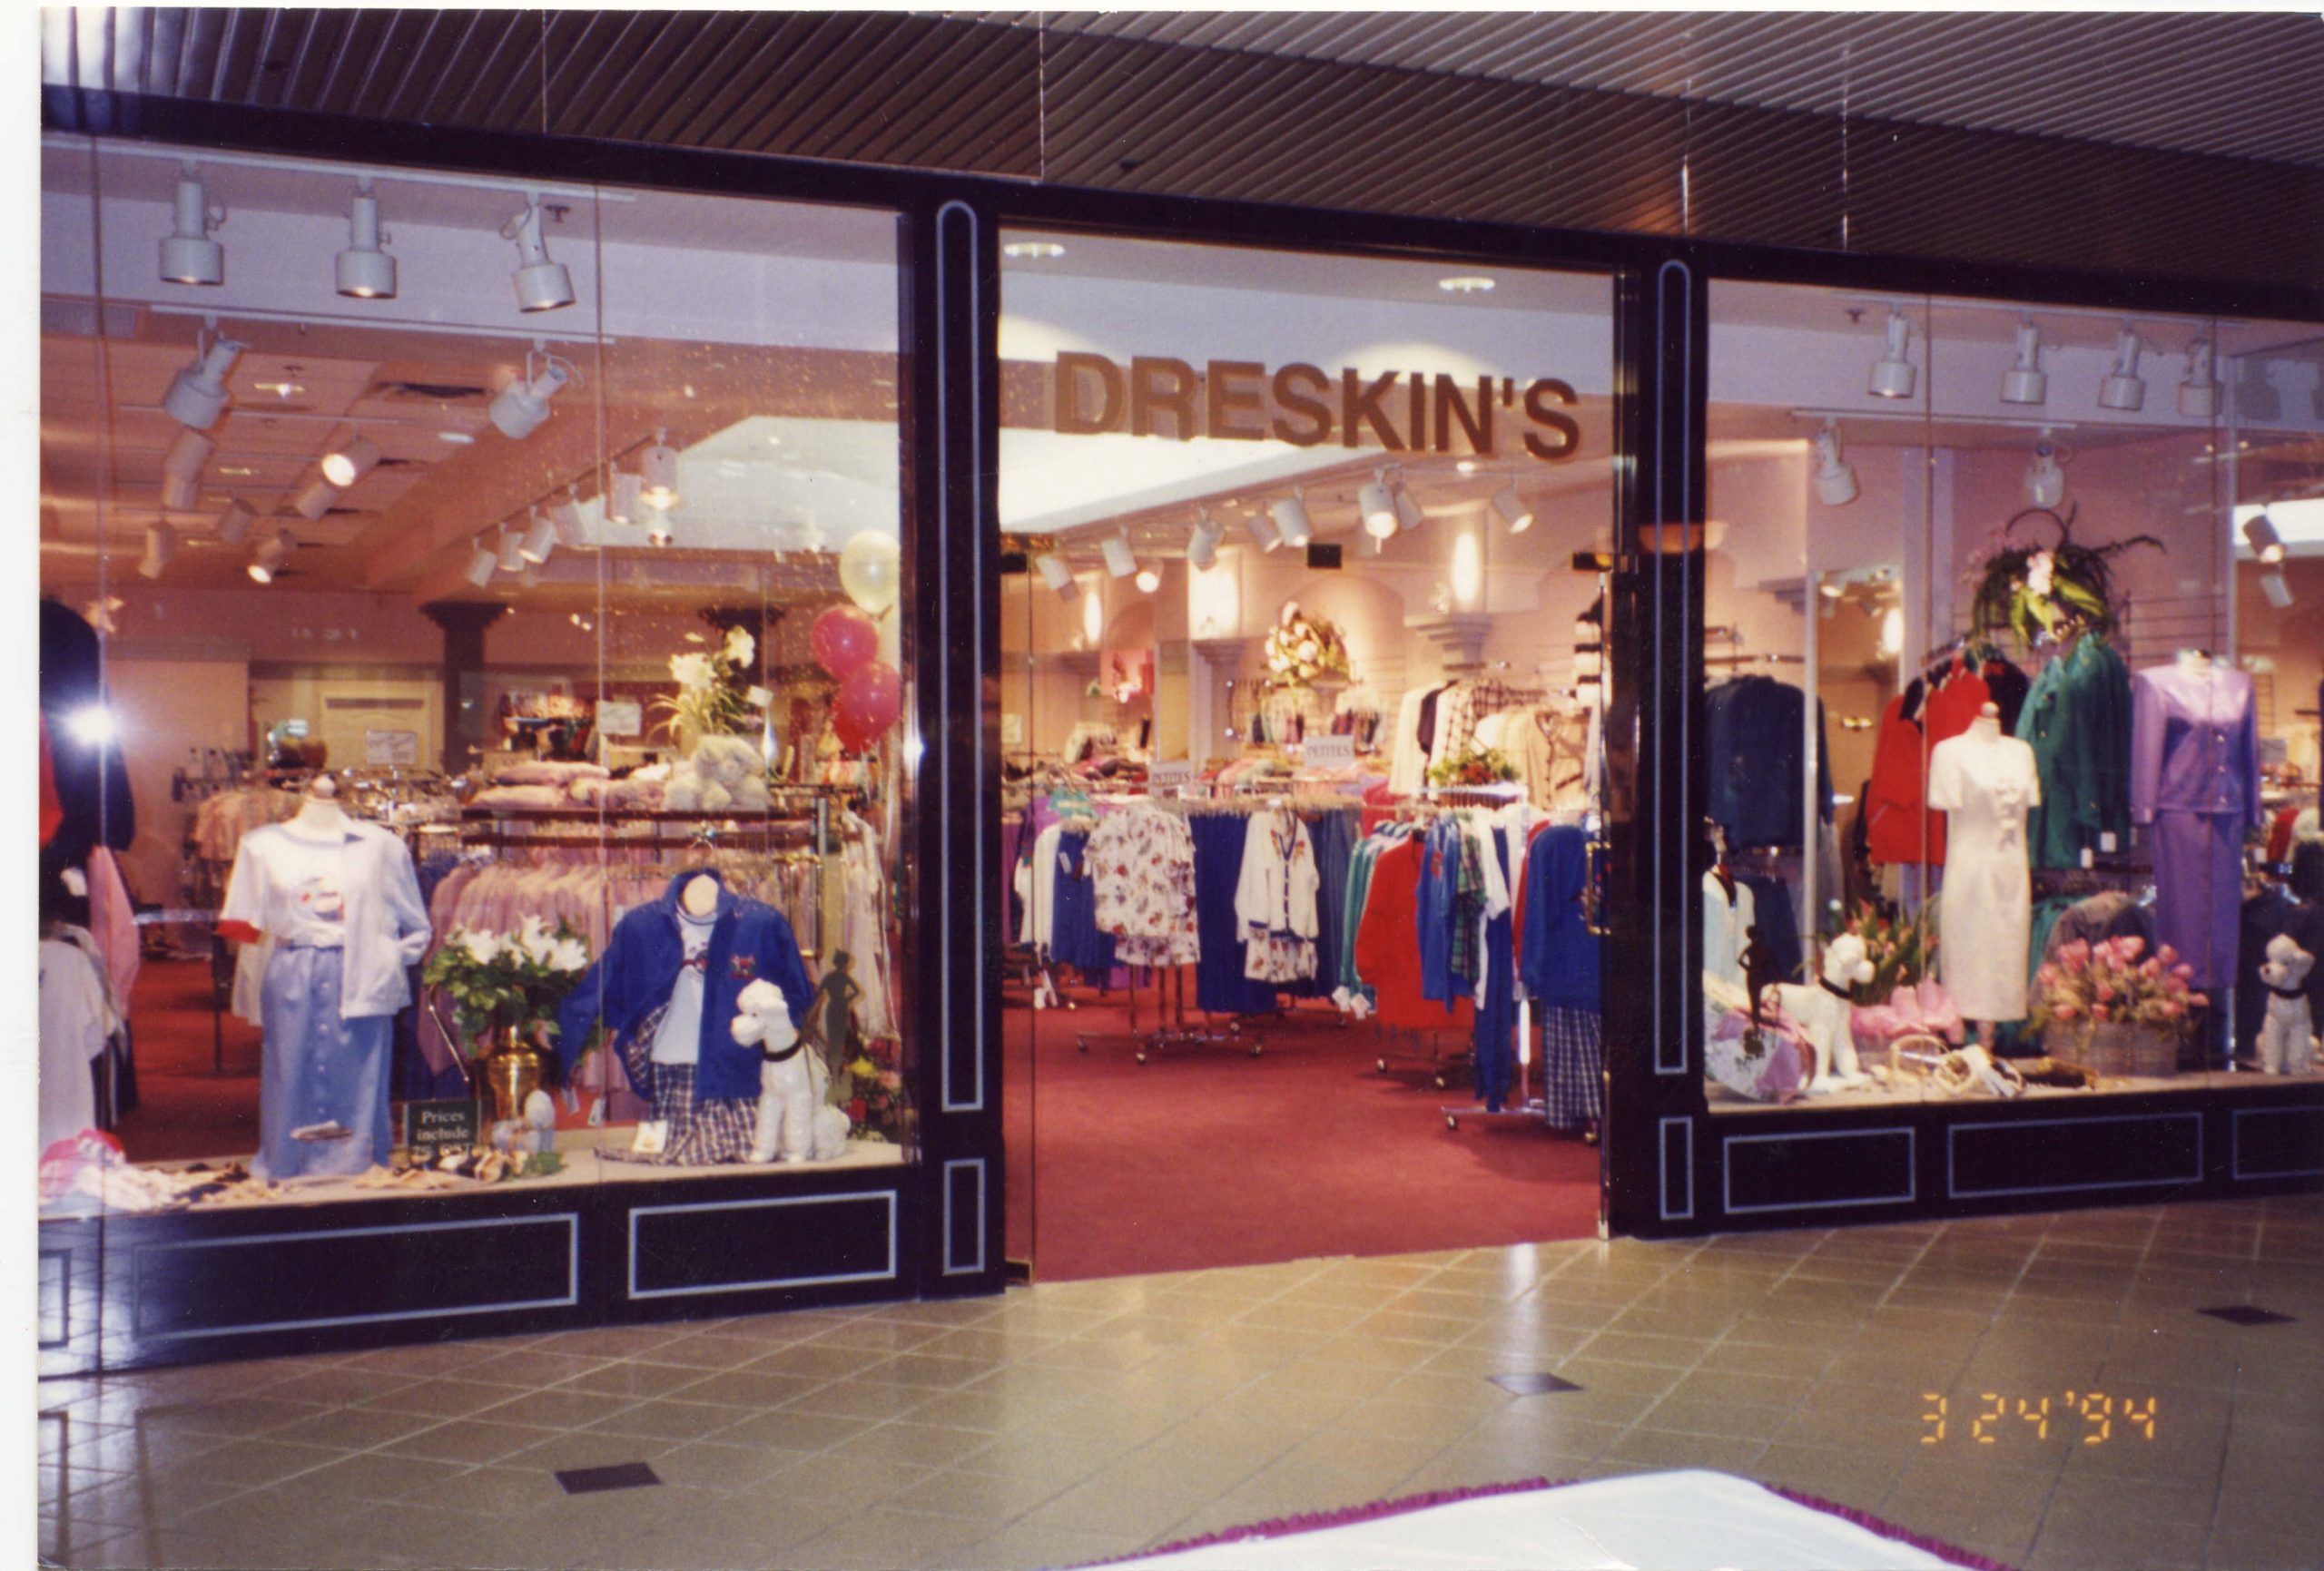 Entrance to ladies' wear store with full glass windows and a wide entrance. Inside the store can be seen racks of ladies’ blouses and dresses. “Dreskin’s” is printed in gold letters over the entrance.